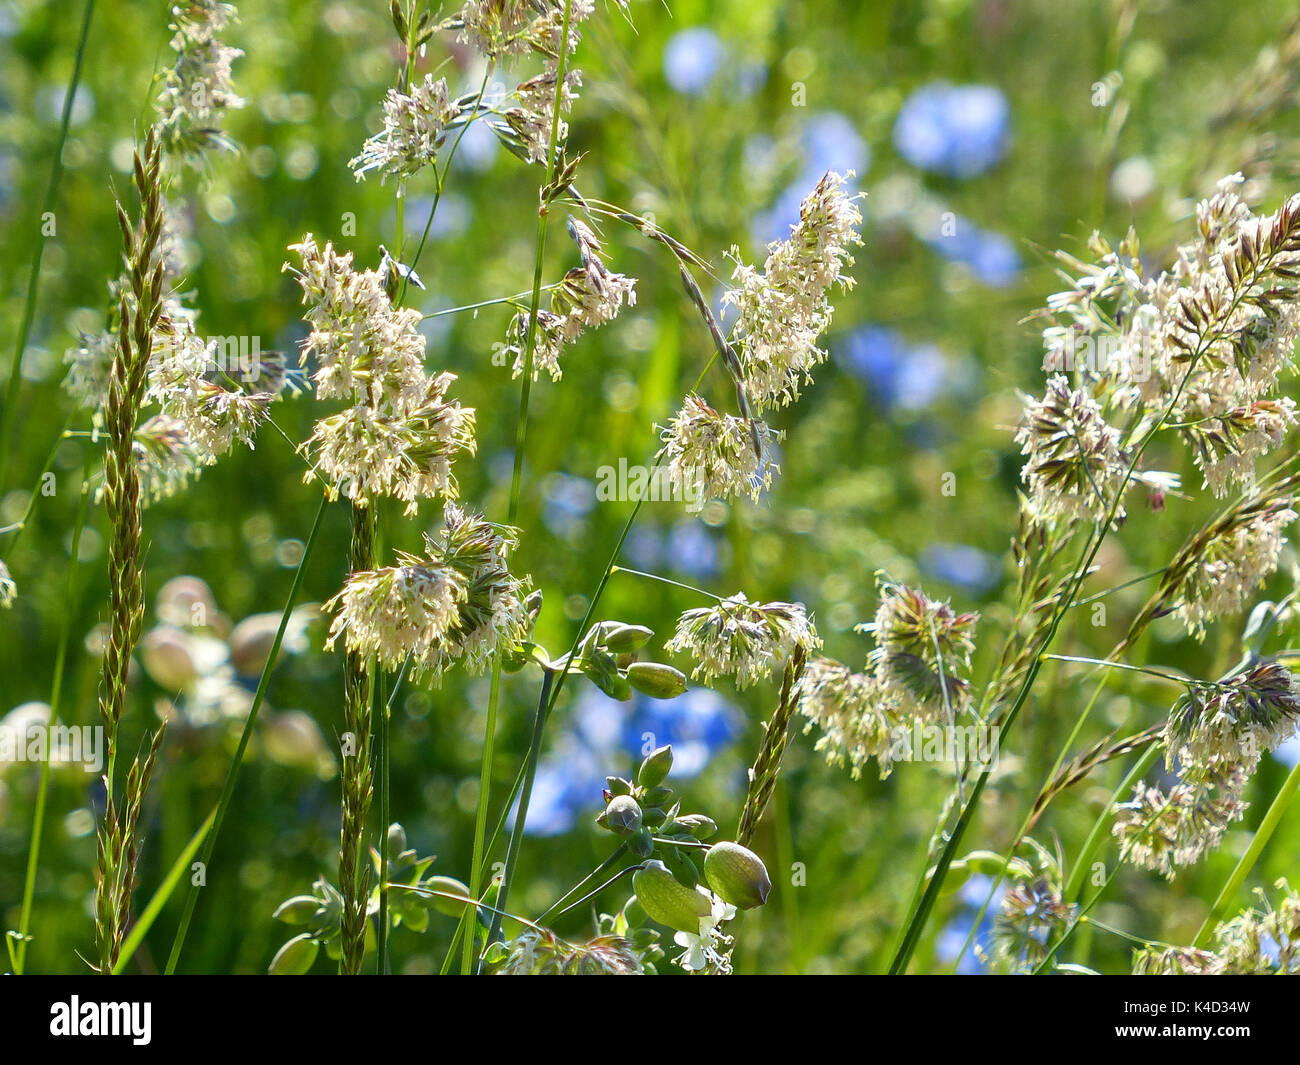 Nice Grasses On A Meadow, Cocksfoot Dactylis Glomerata And Perennial Ryegrass Lolium Perenne Stock Photo